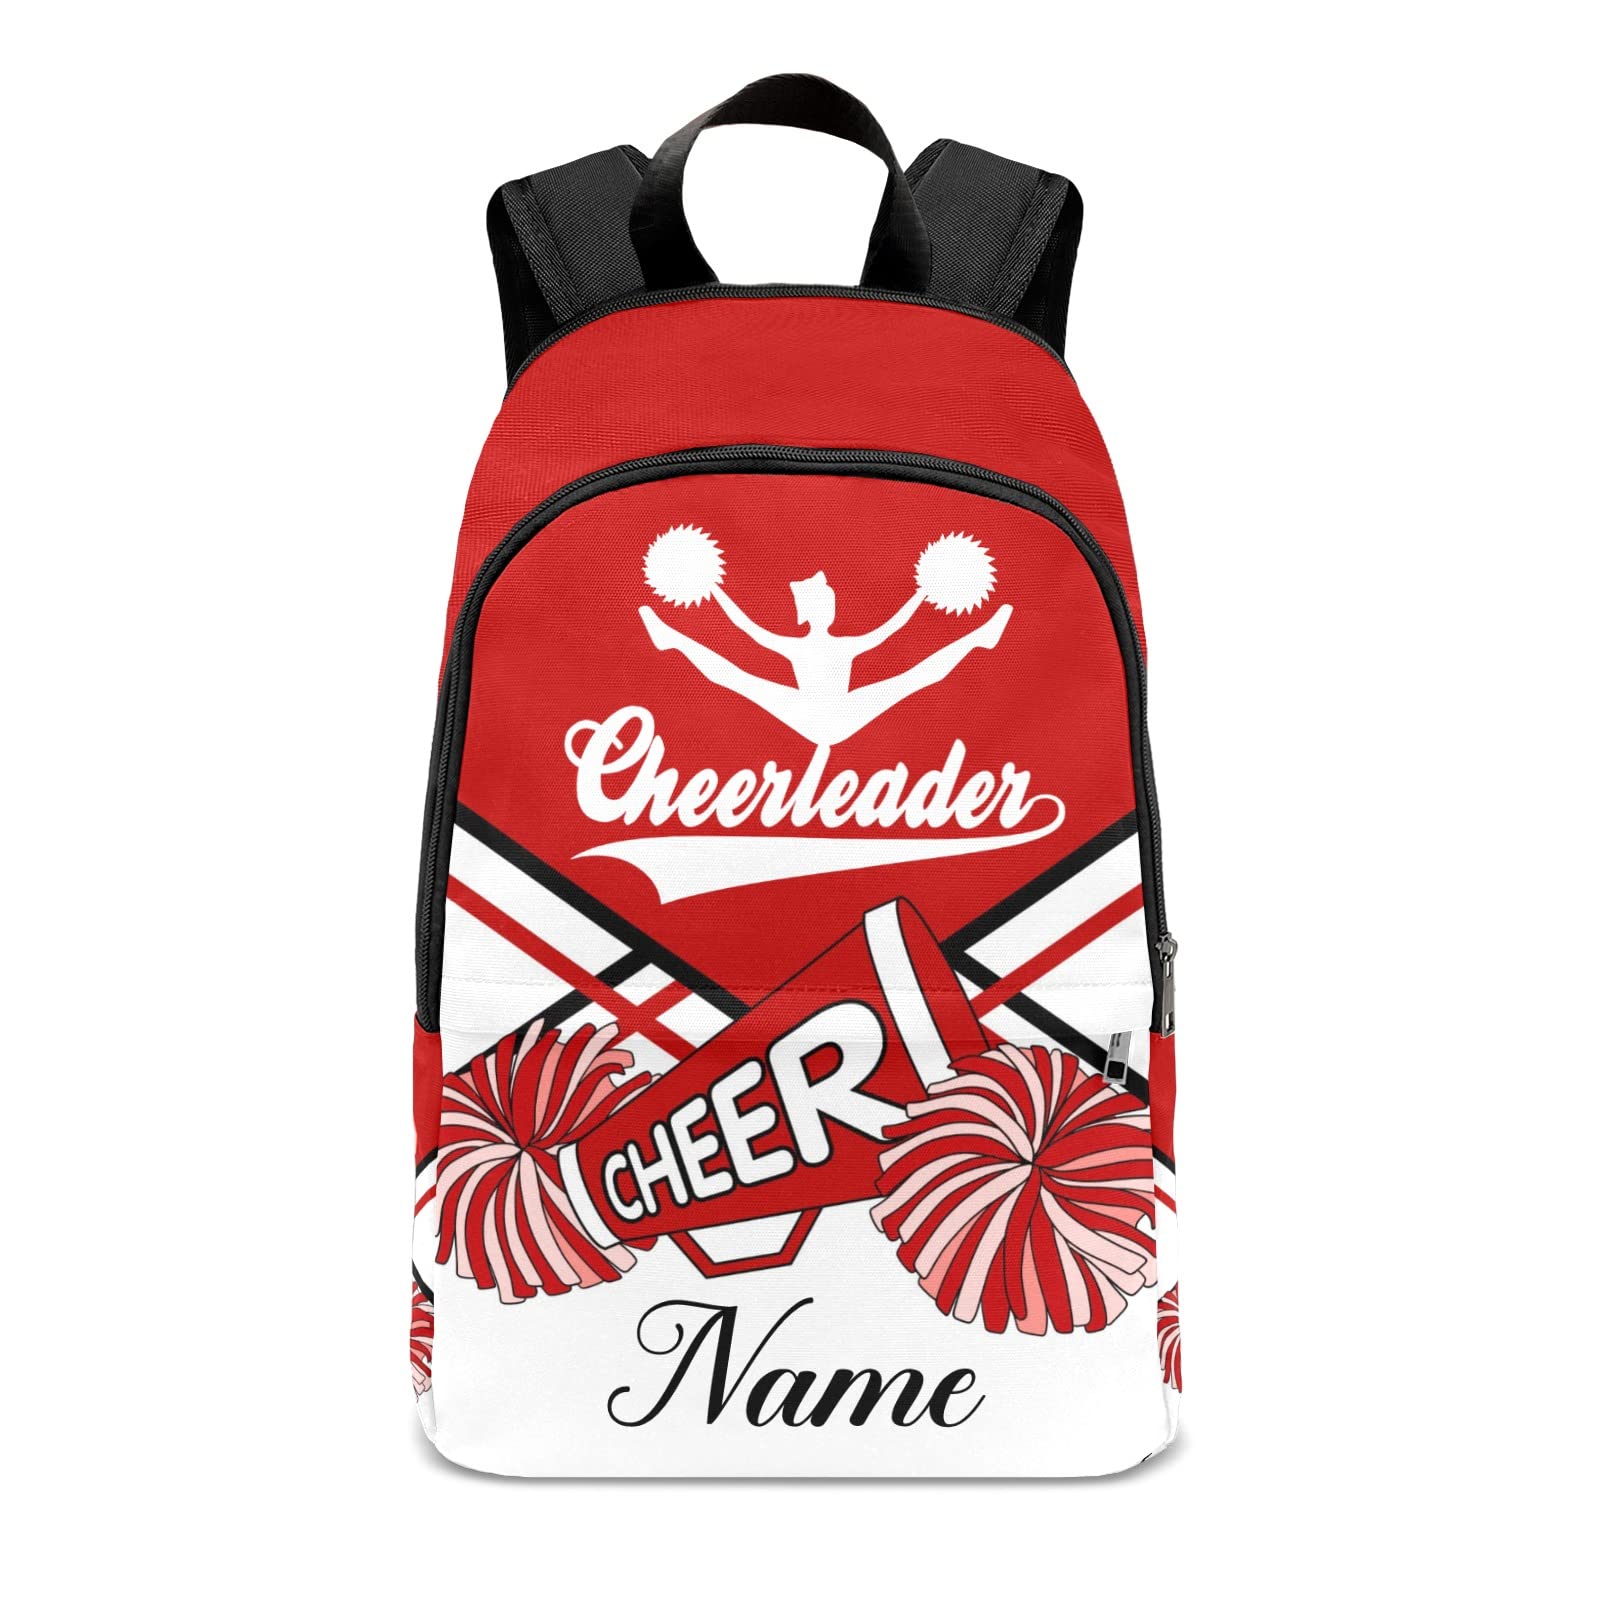 zaaprintblanket Personalized Cheerleader Cheer White Red Backpack Casual Daypack Bag for Man Woman